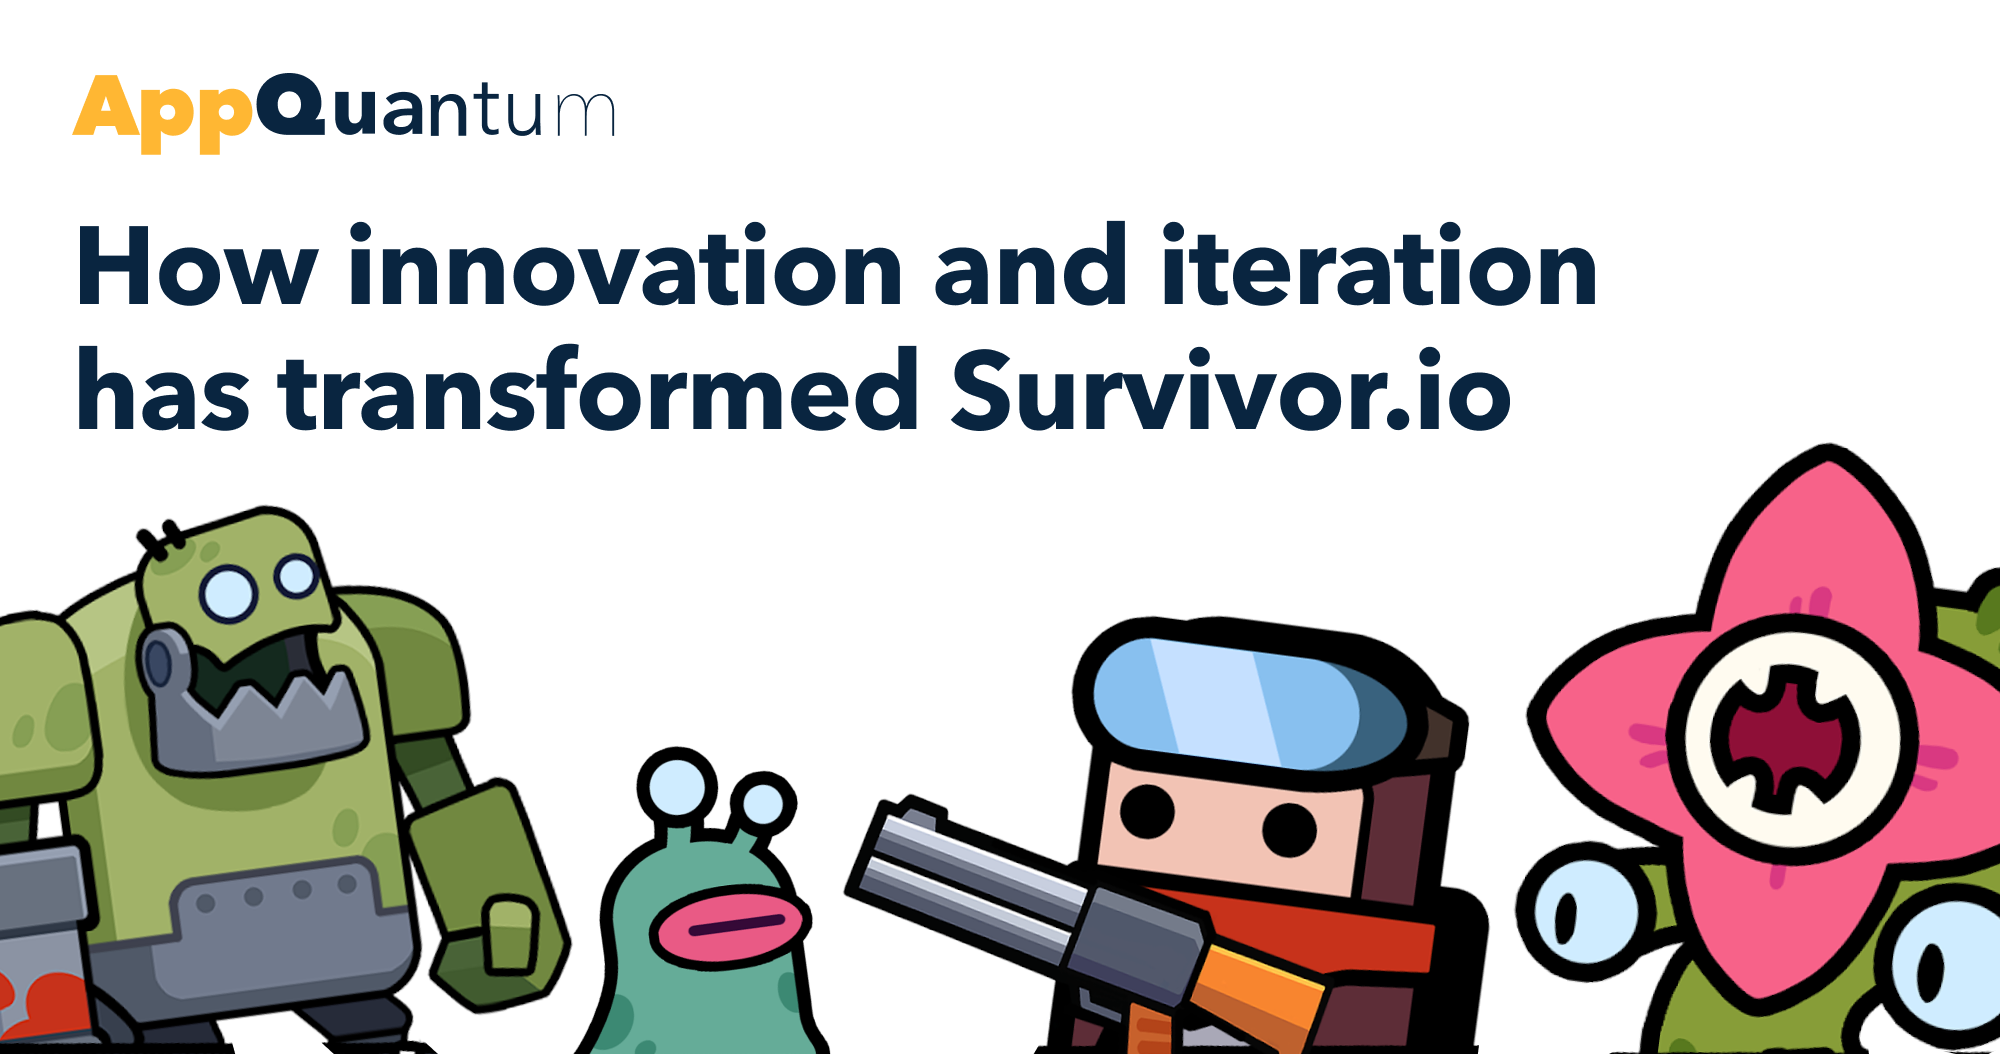 AppQuantum Deconstructs Survivor.io: How Innovation and Iteration Has Transformed the Game